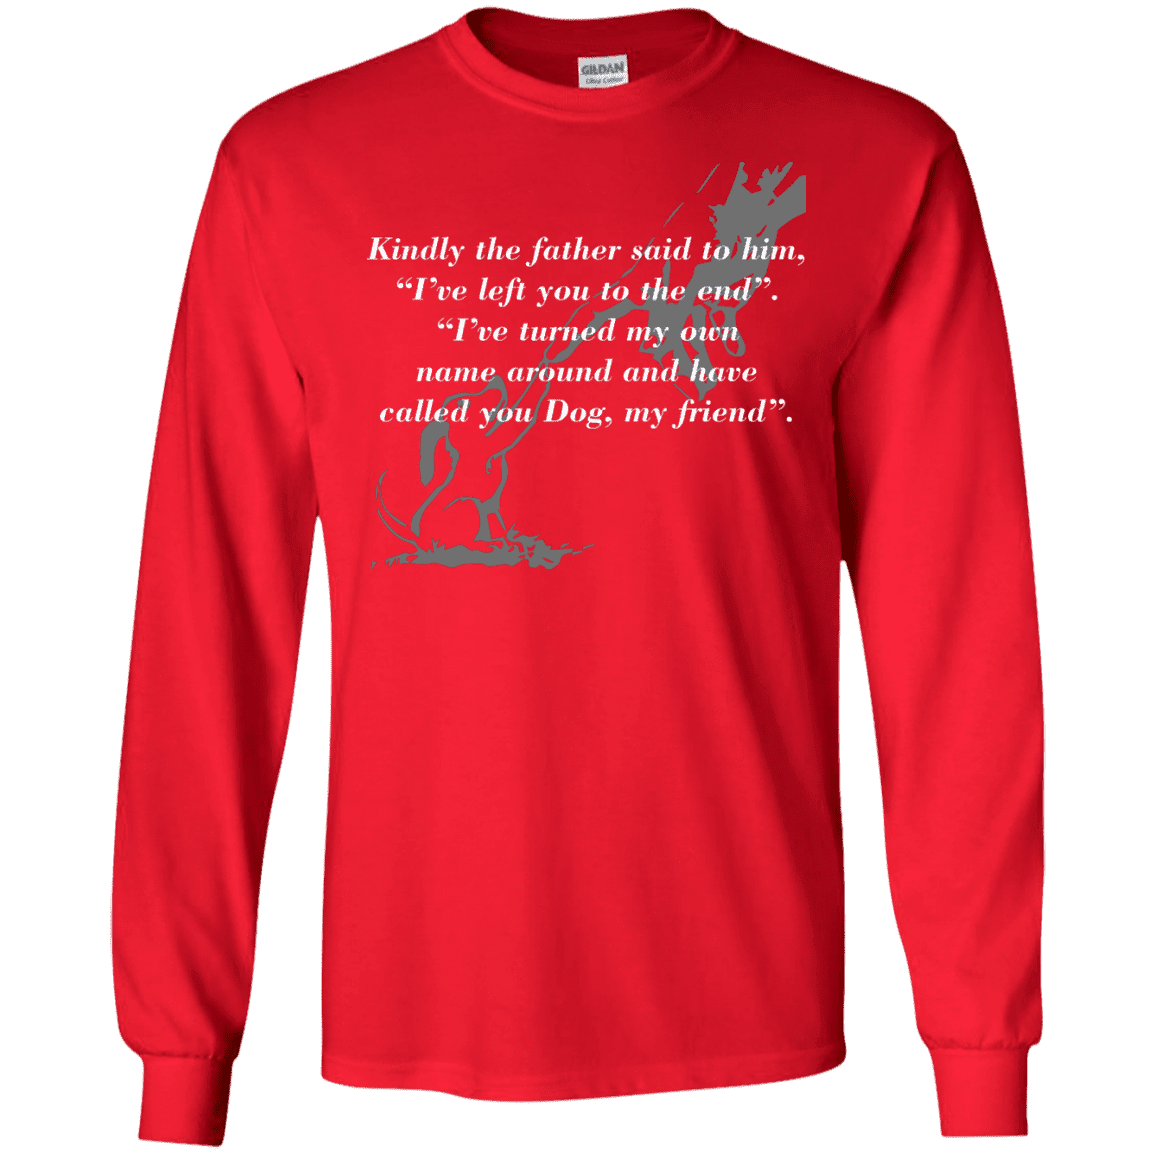 Called You Dog My Friend - Long Sleeve T Shirt.